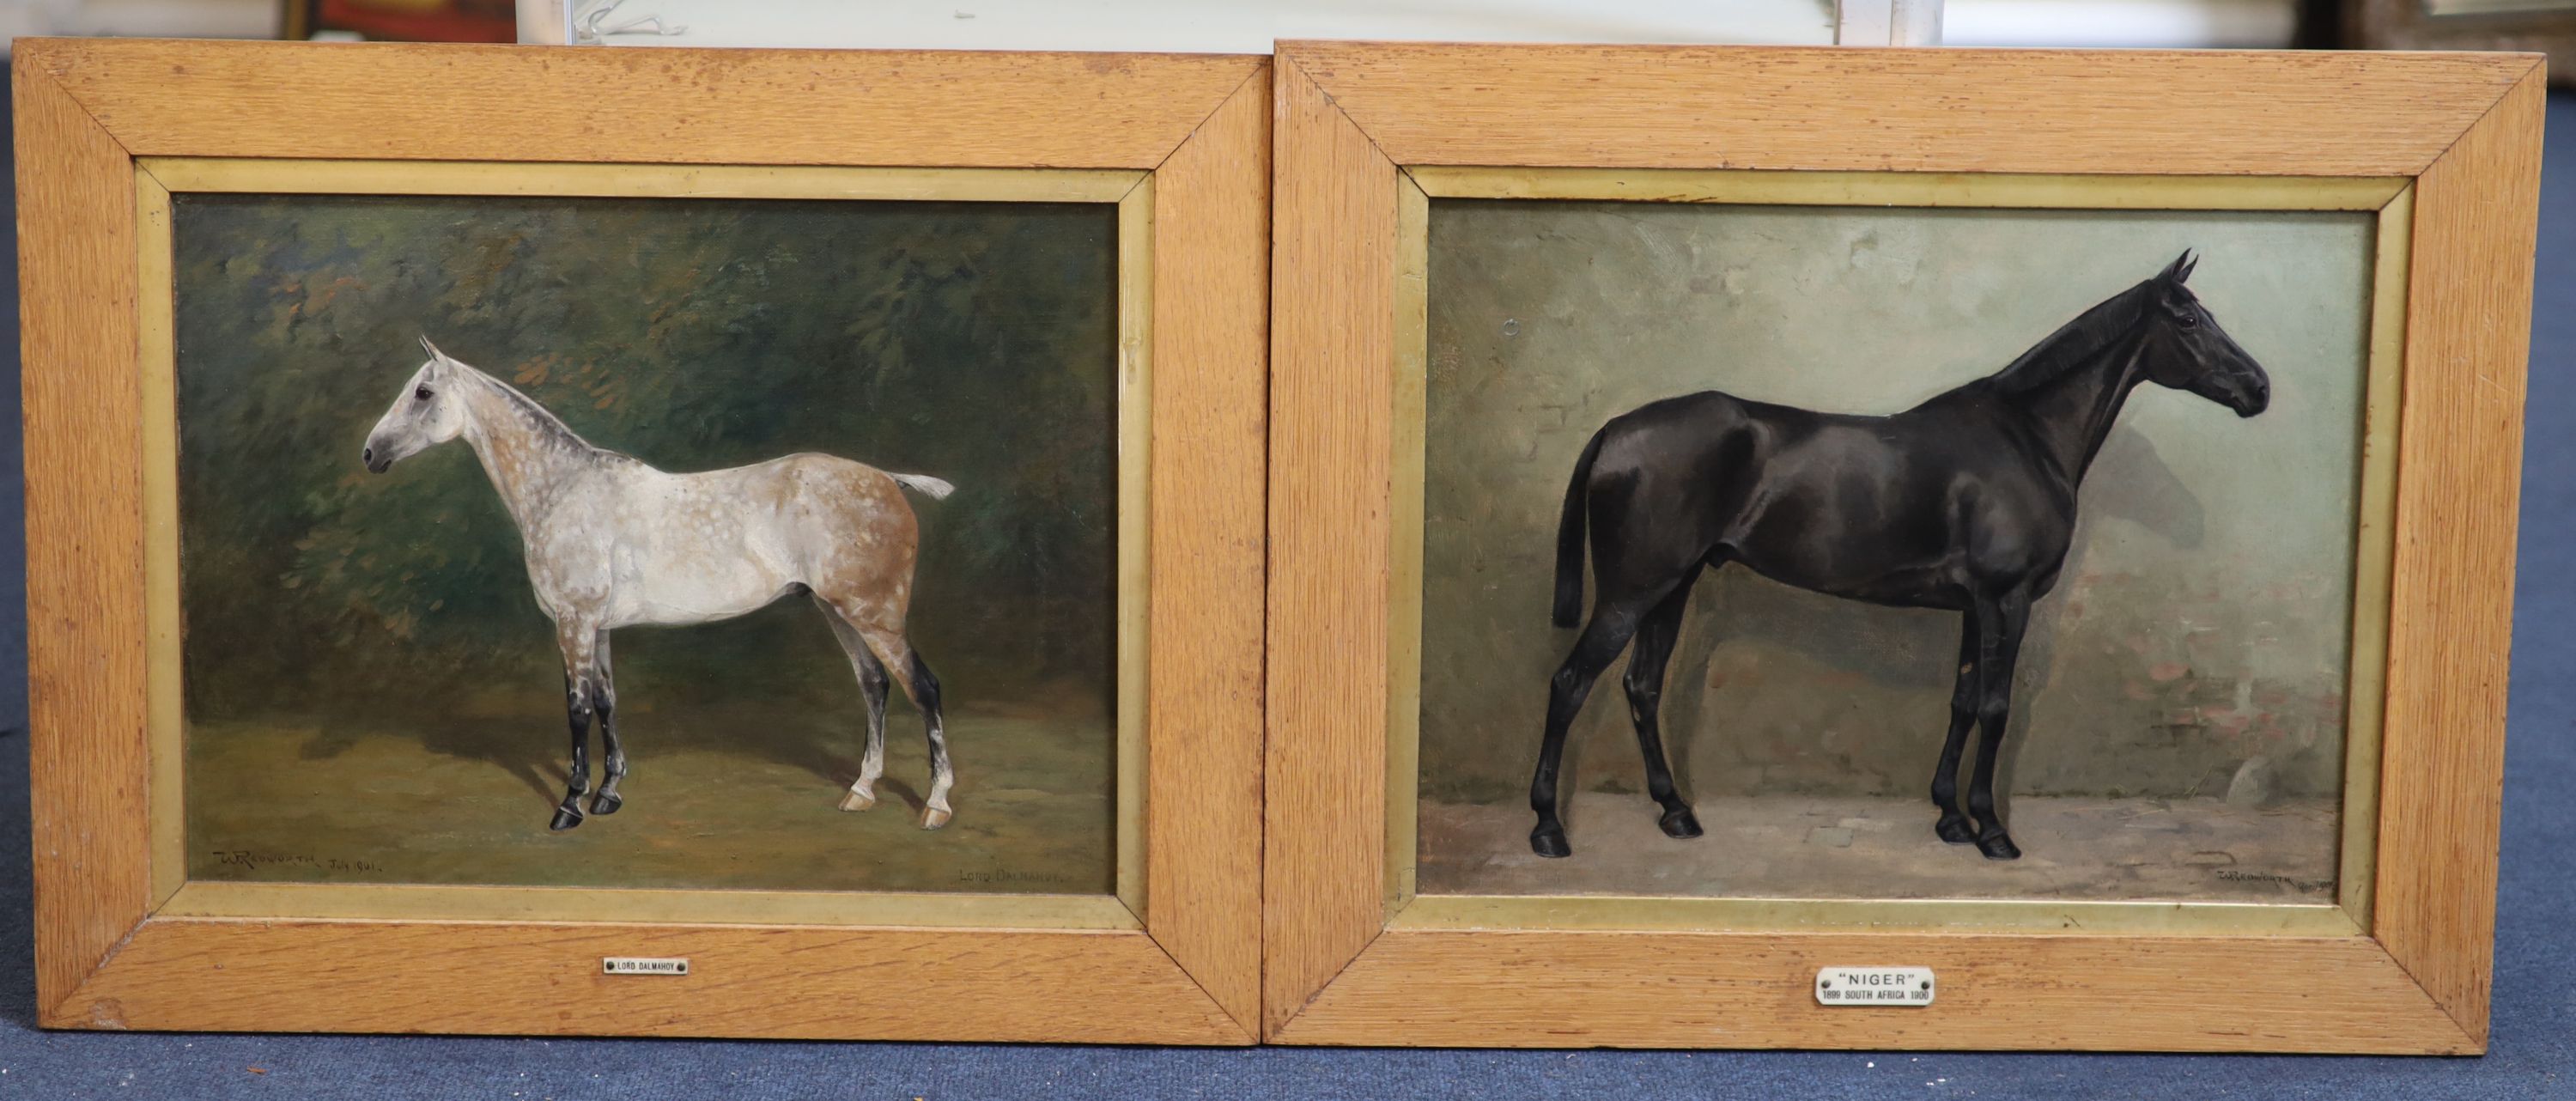 William Joseph Redworth (1873-1941) Portraits of Racehorses: Archdeacon, Chanois, Lord Dalmahoy and Niger 11.75 x 15.5in